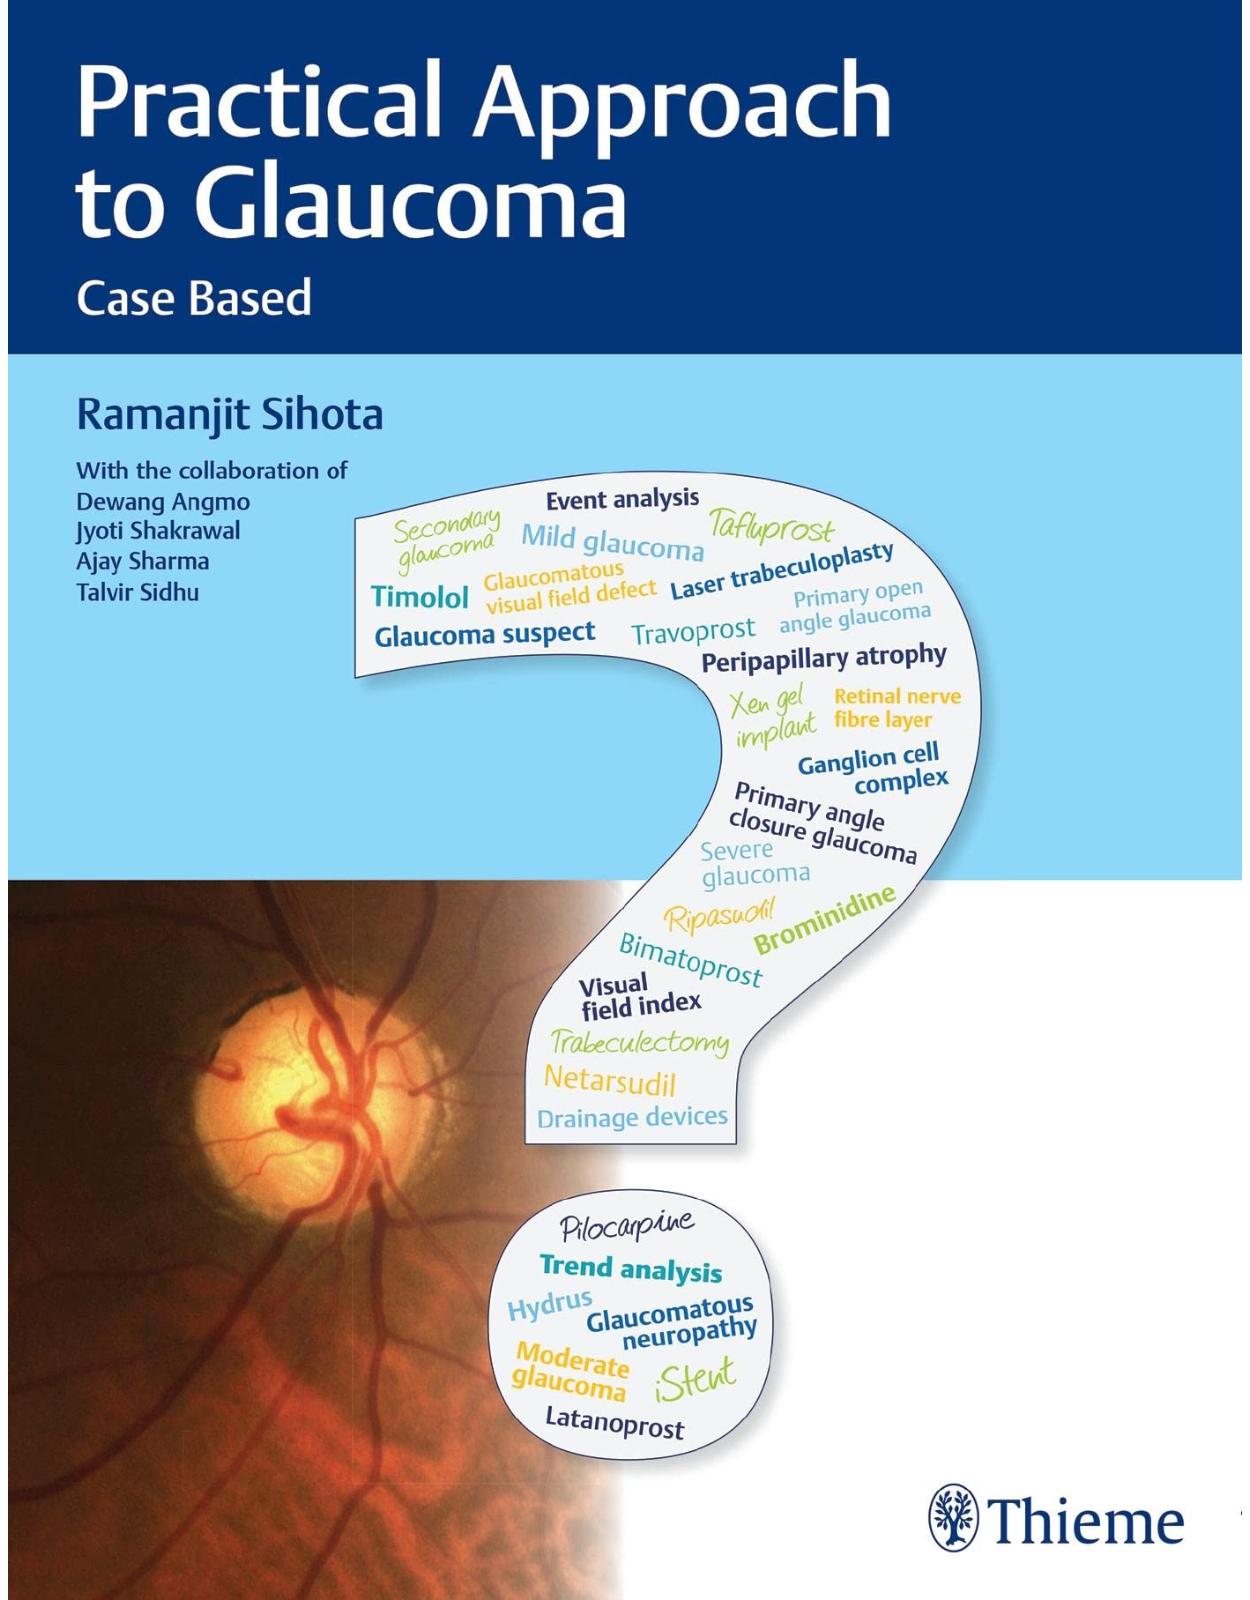 Practical Approach to Glaucoma: Case Based